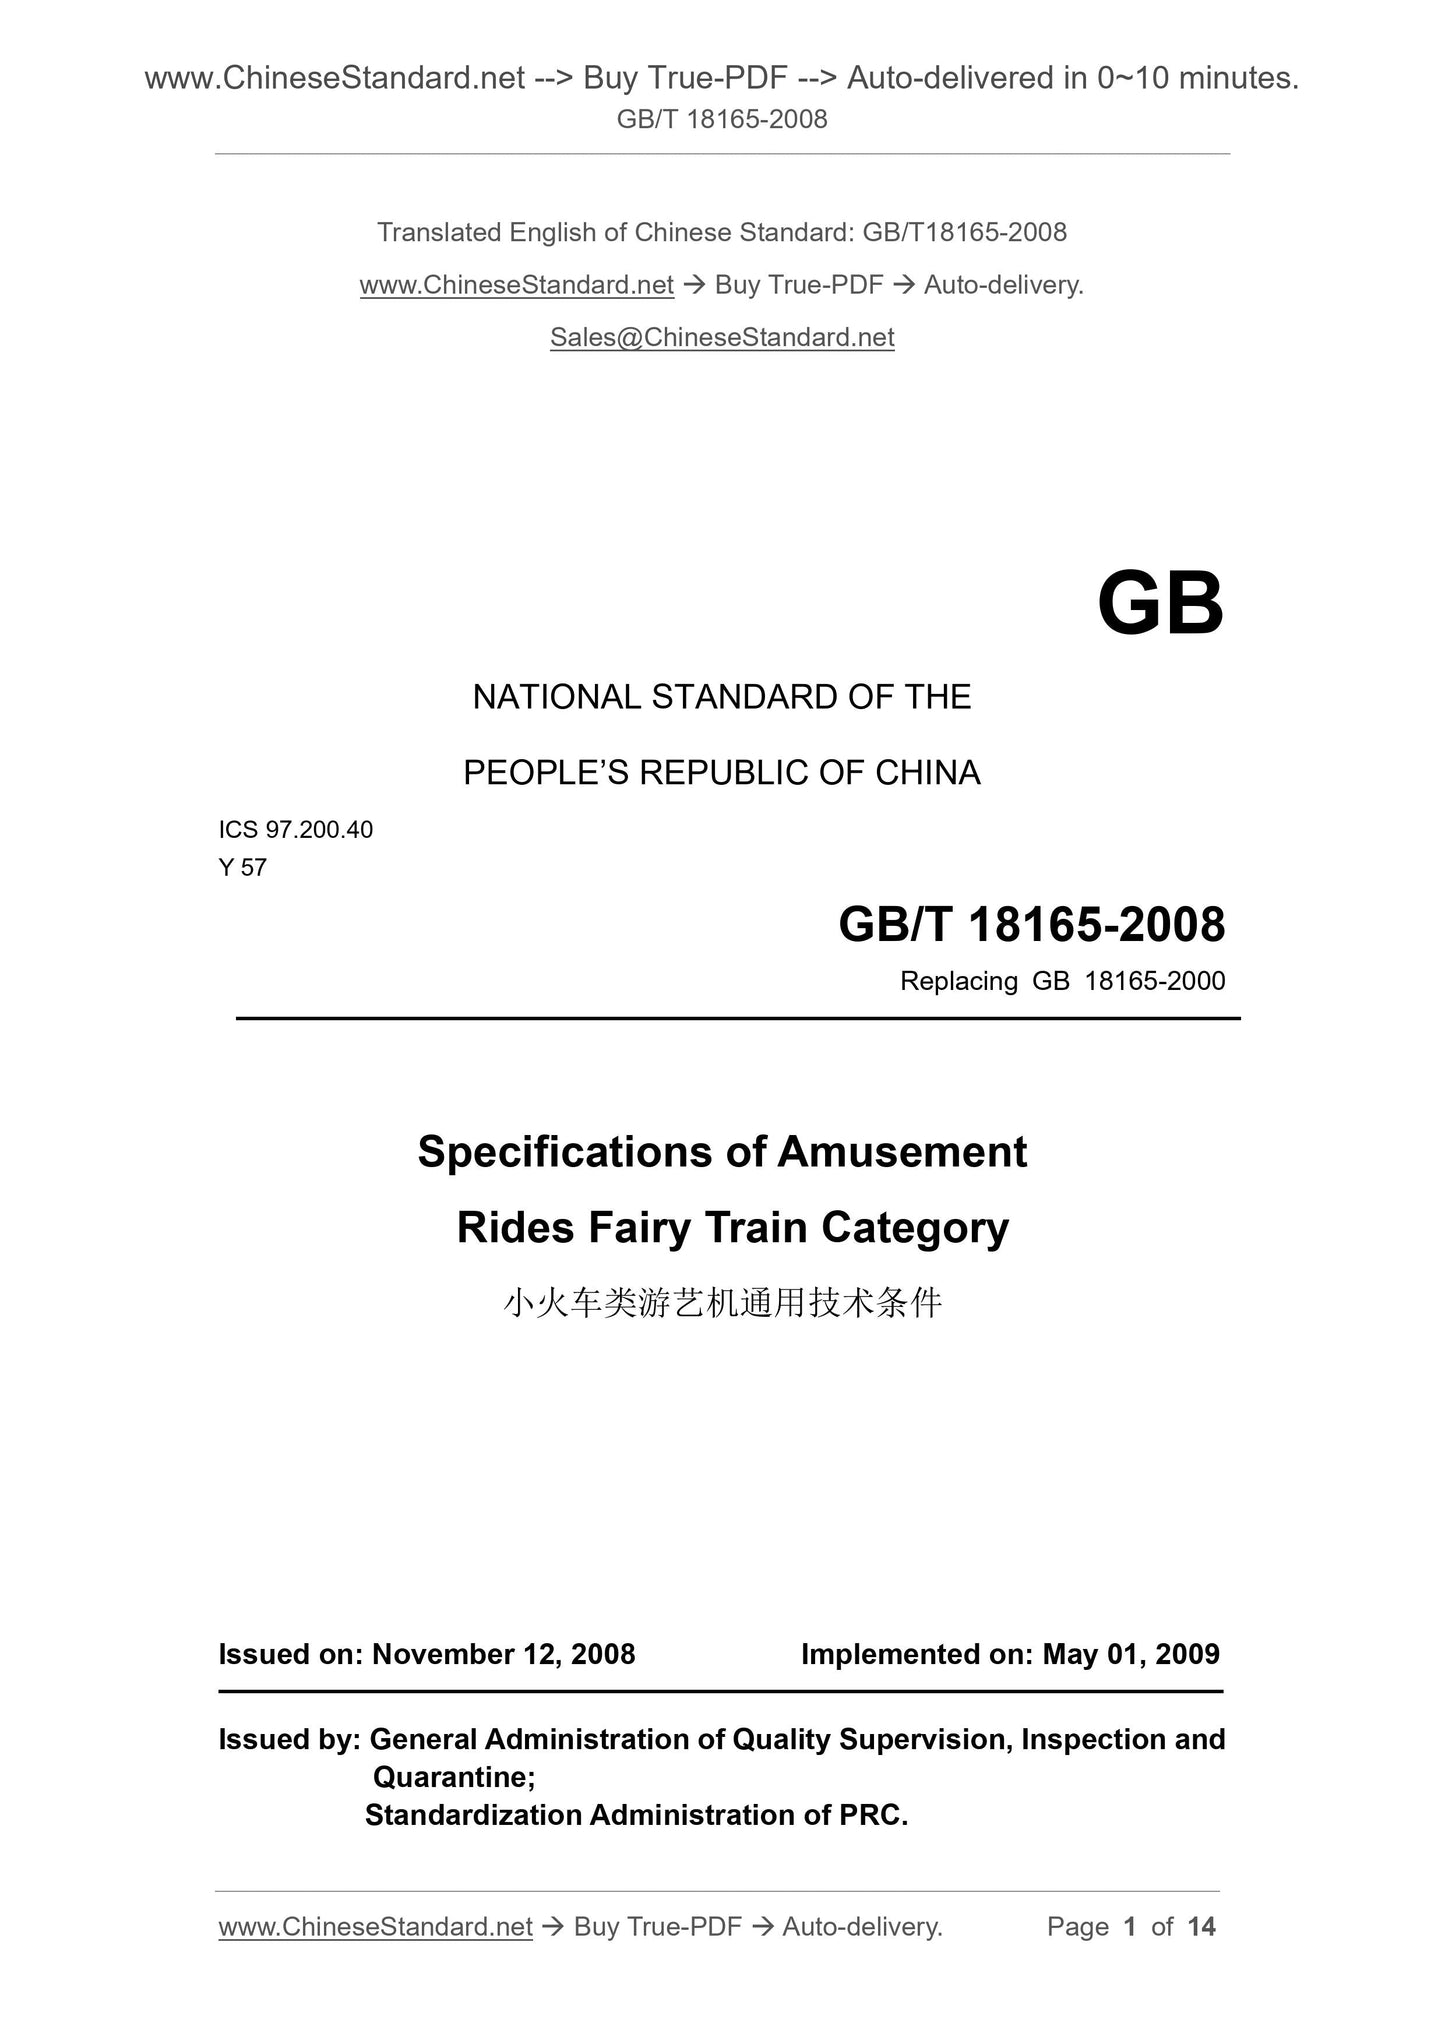 GB/T 18165-2008 Page 1